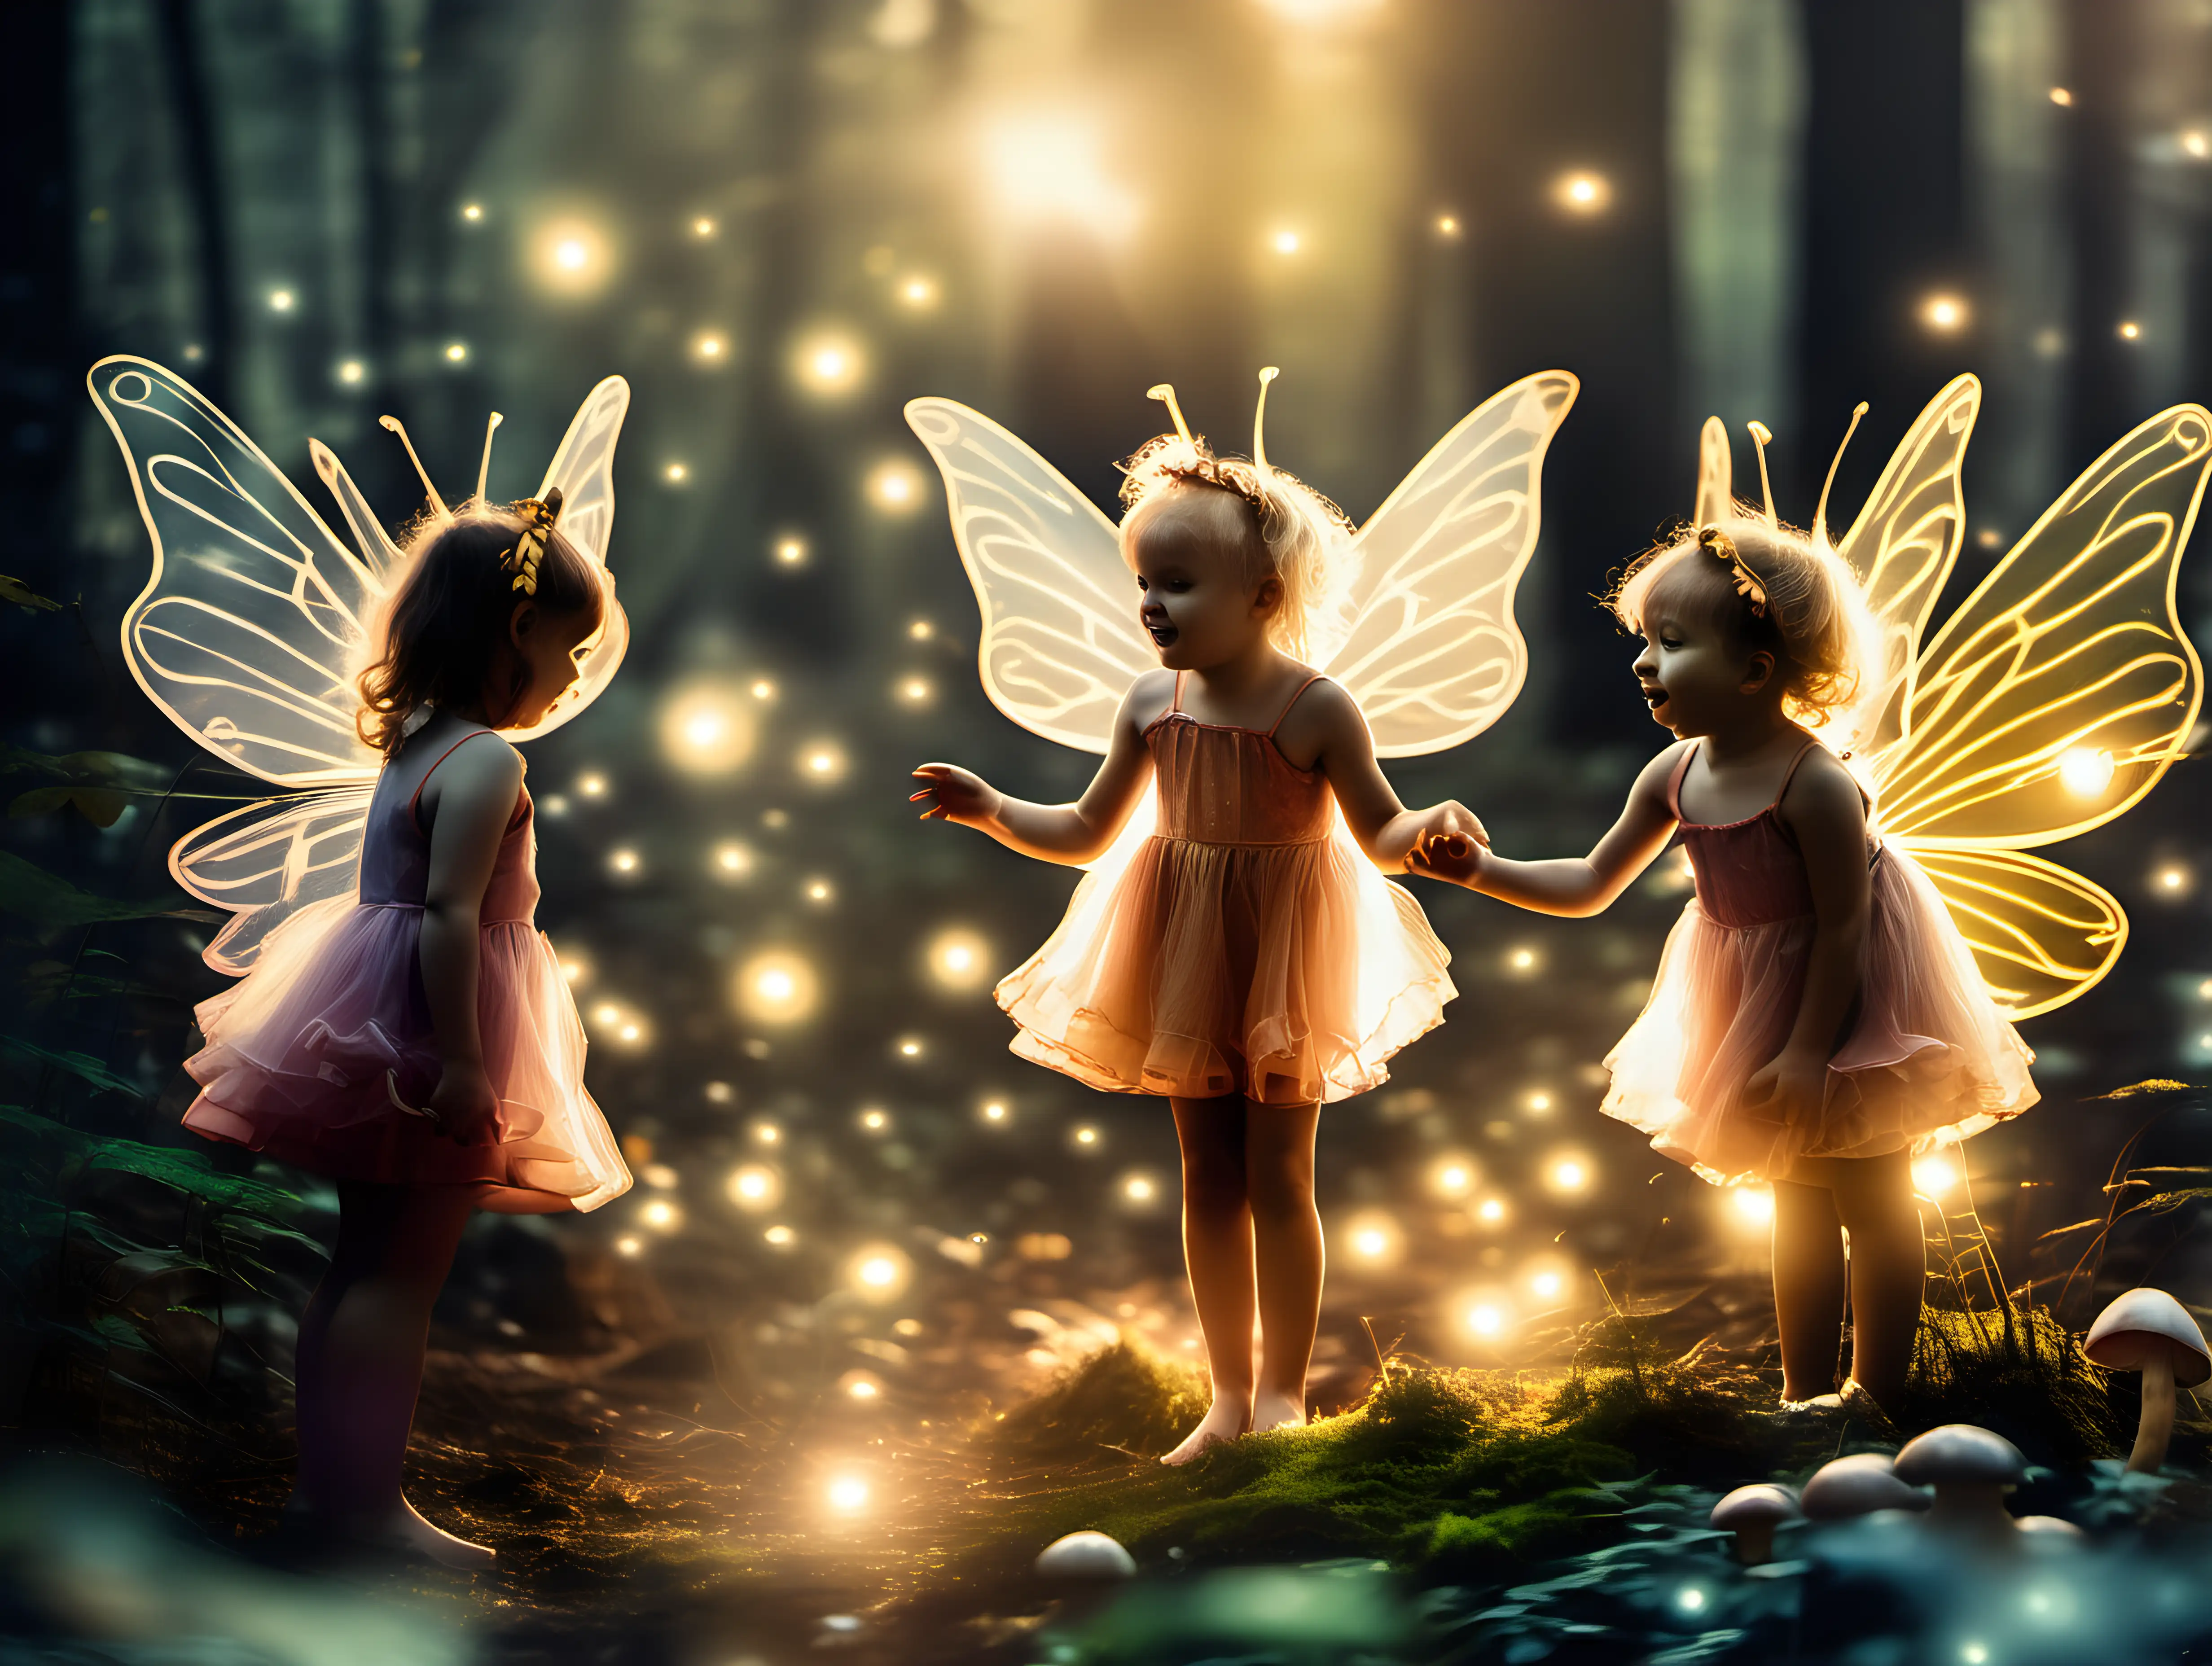 Enchanting Morning Play Young Fairies Amidst Glowing Orbs in the Forest